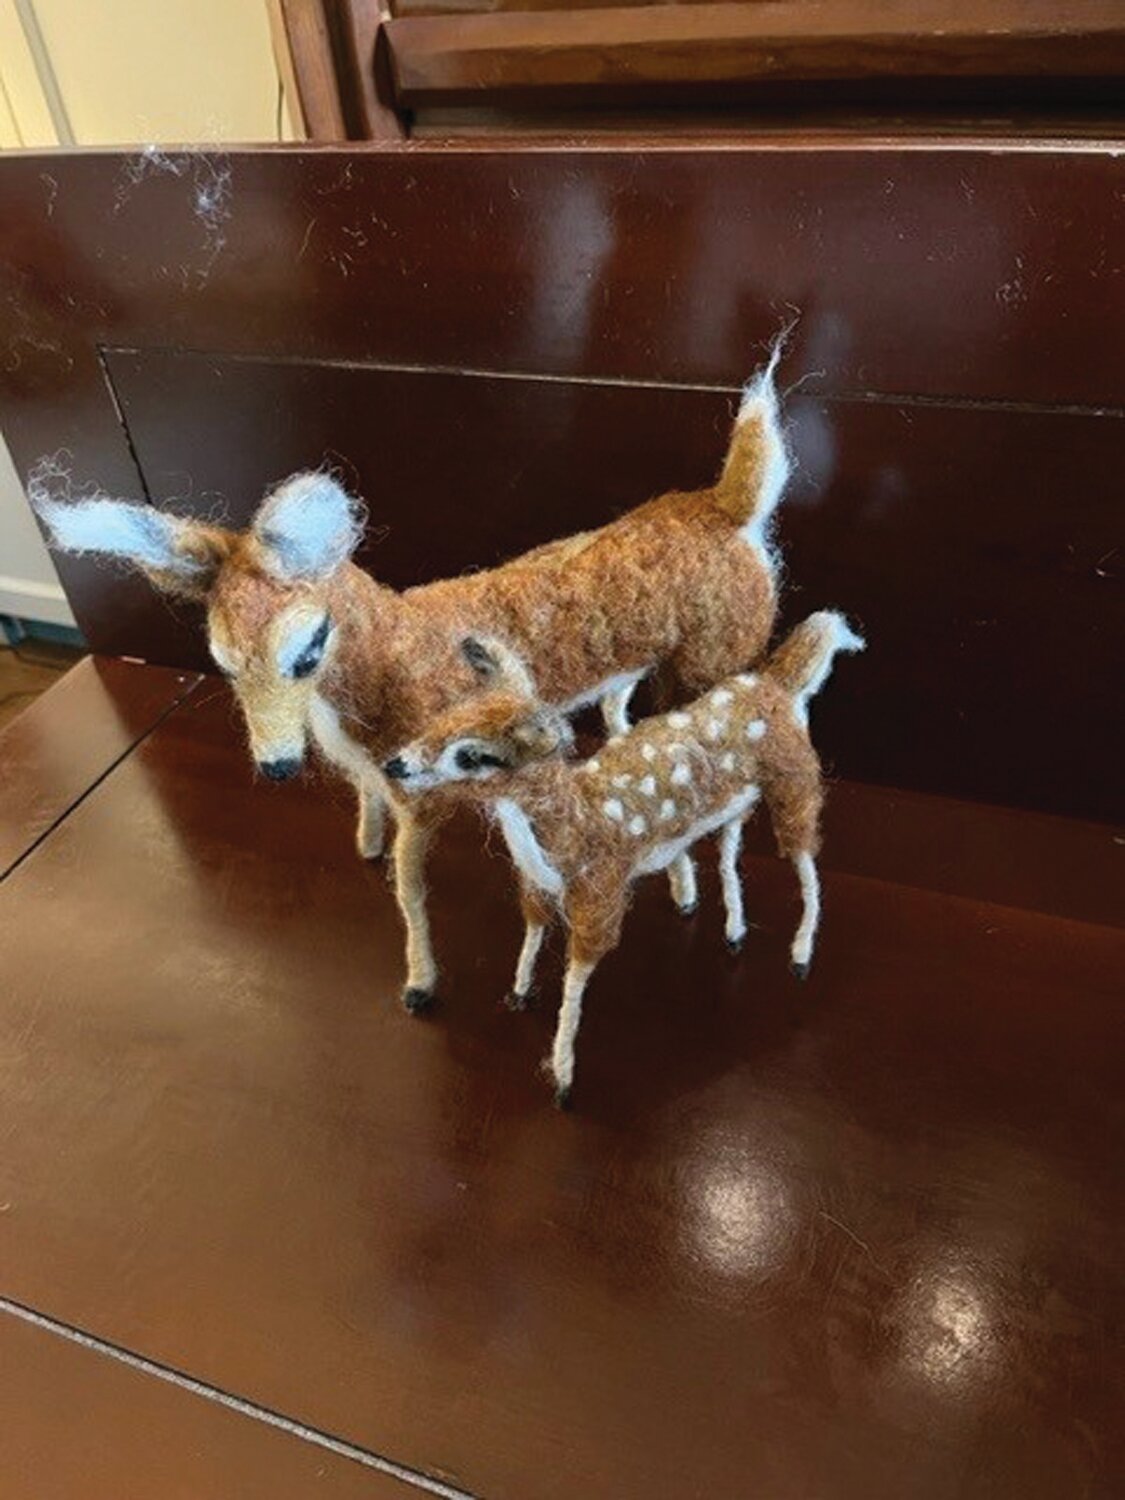 Doe and fawn, definitely Pennsylvania whitetail deer, are among Gerry Mulloy’s menagerie of knitted animals.